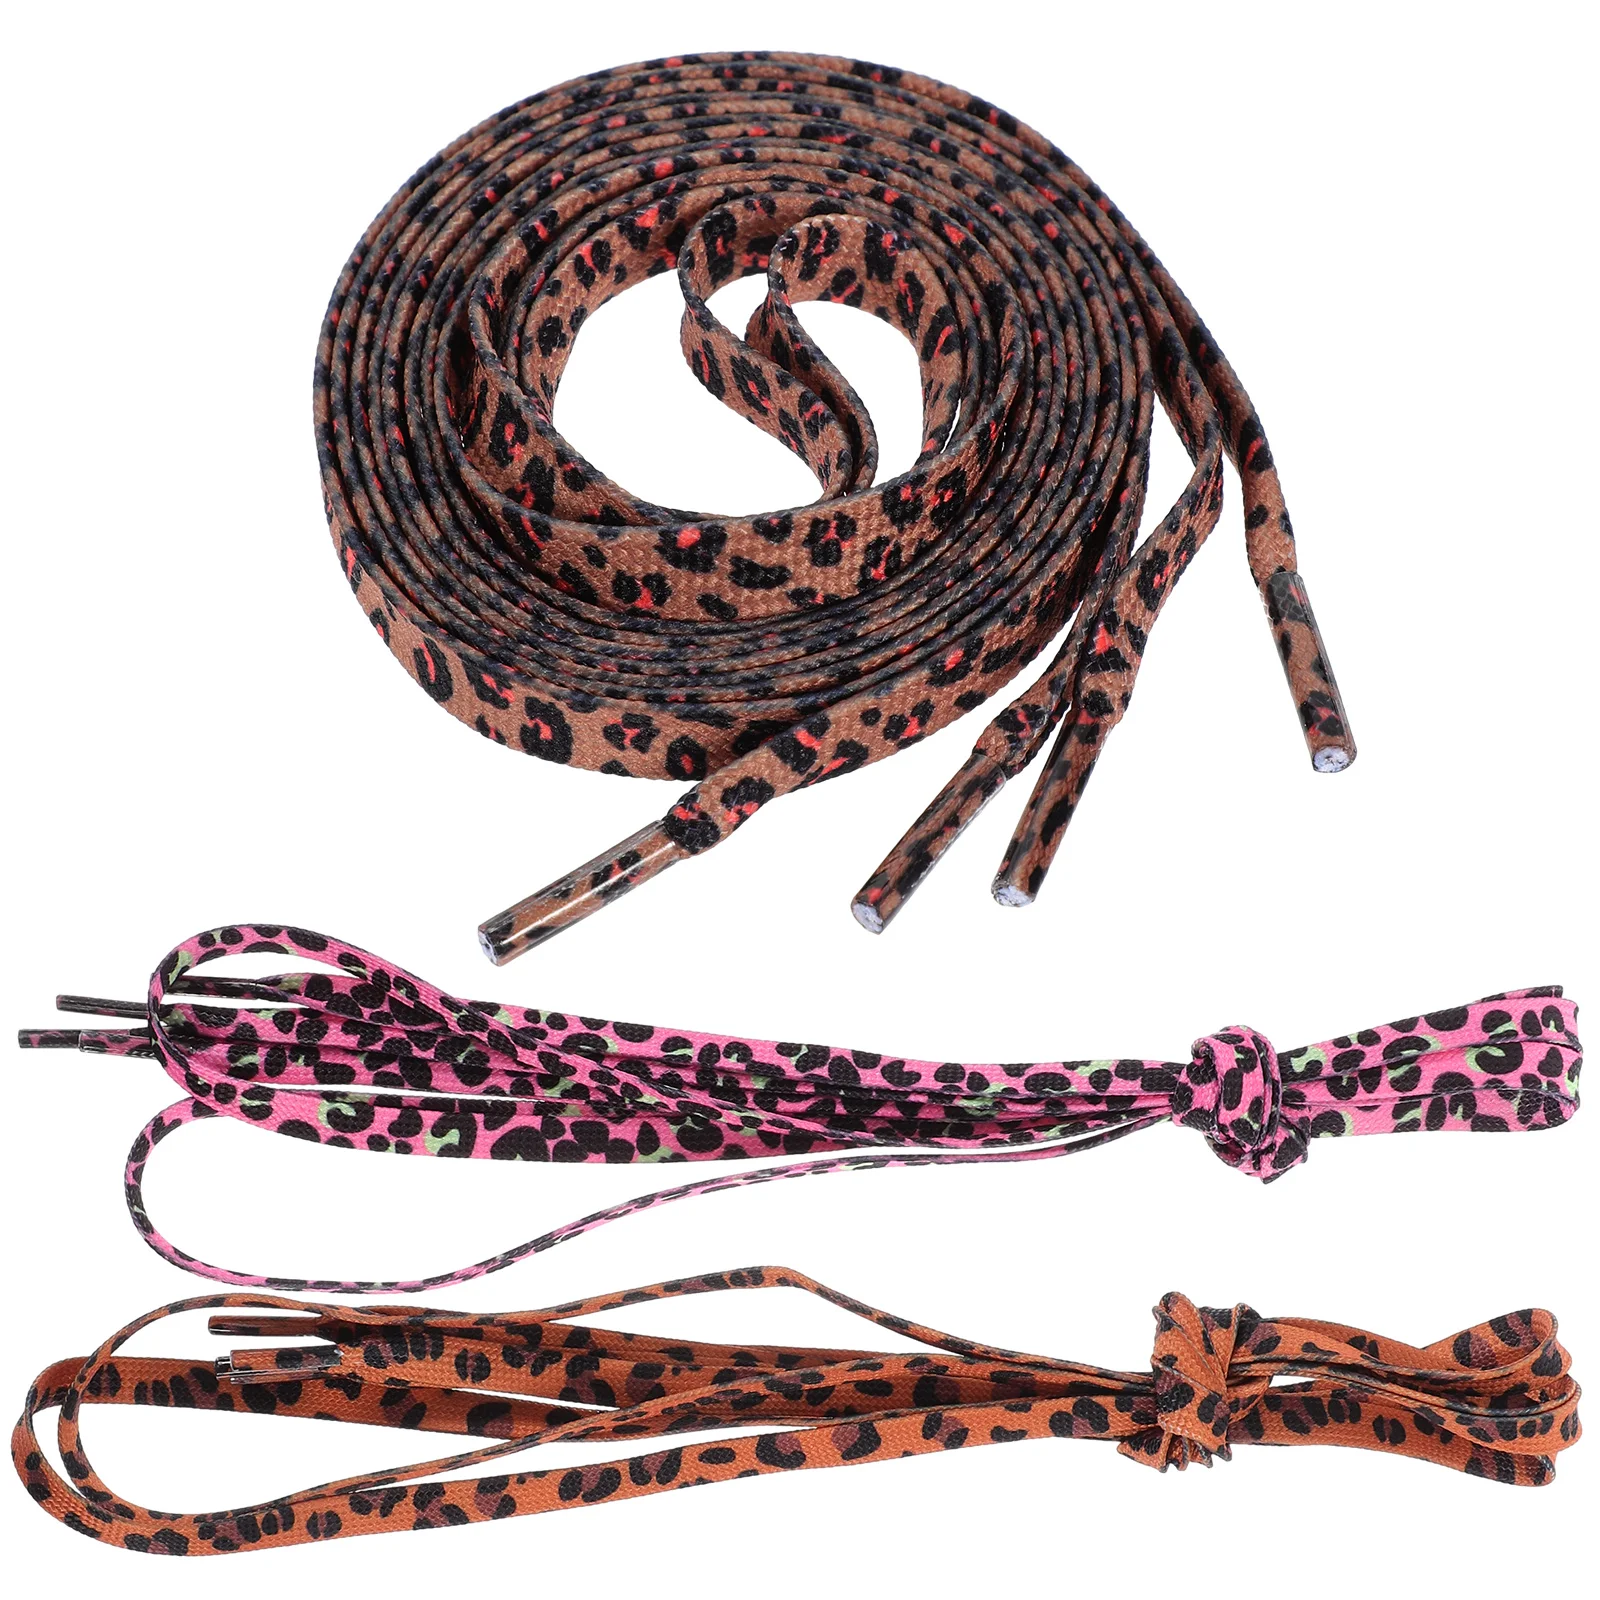 3 Pairs Shoelace Laces for Sneakers Leopard Print Shoelaces Polyester Flat Decorative